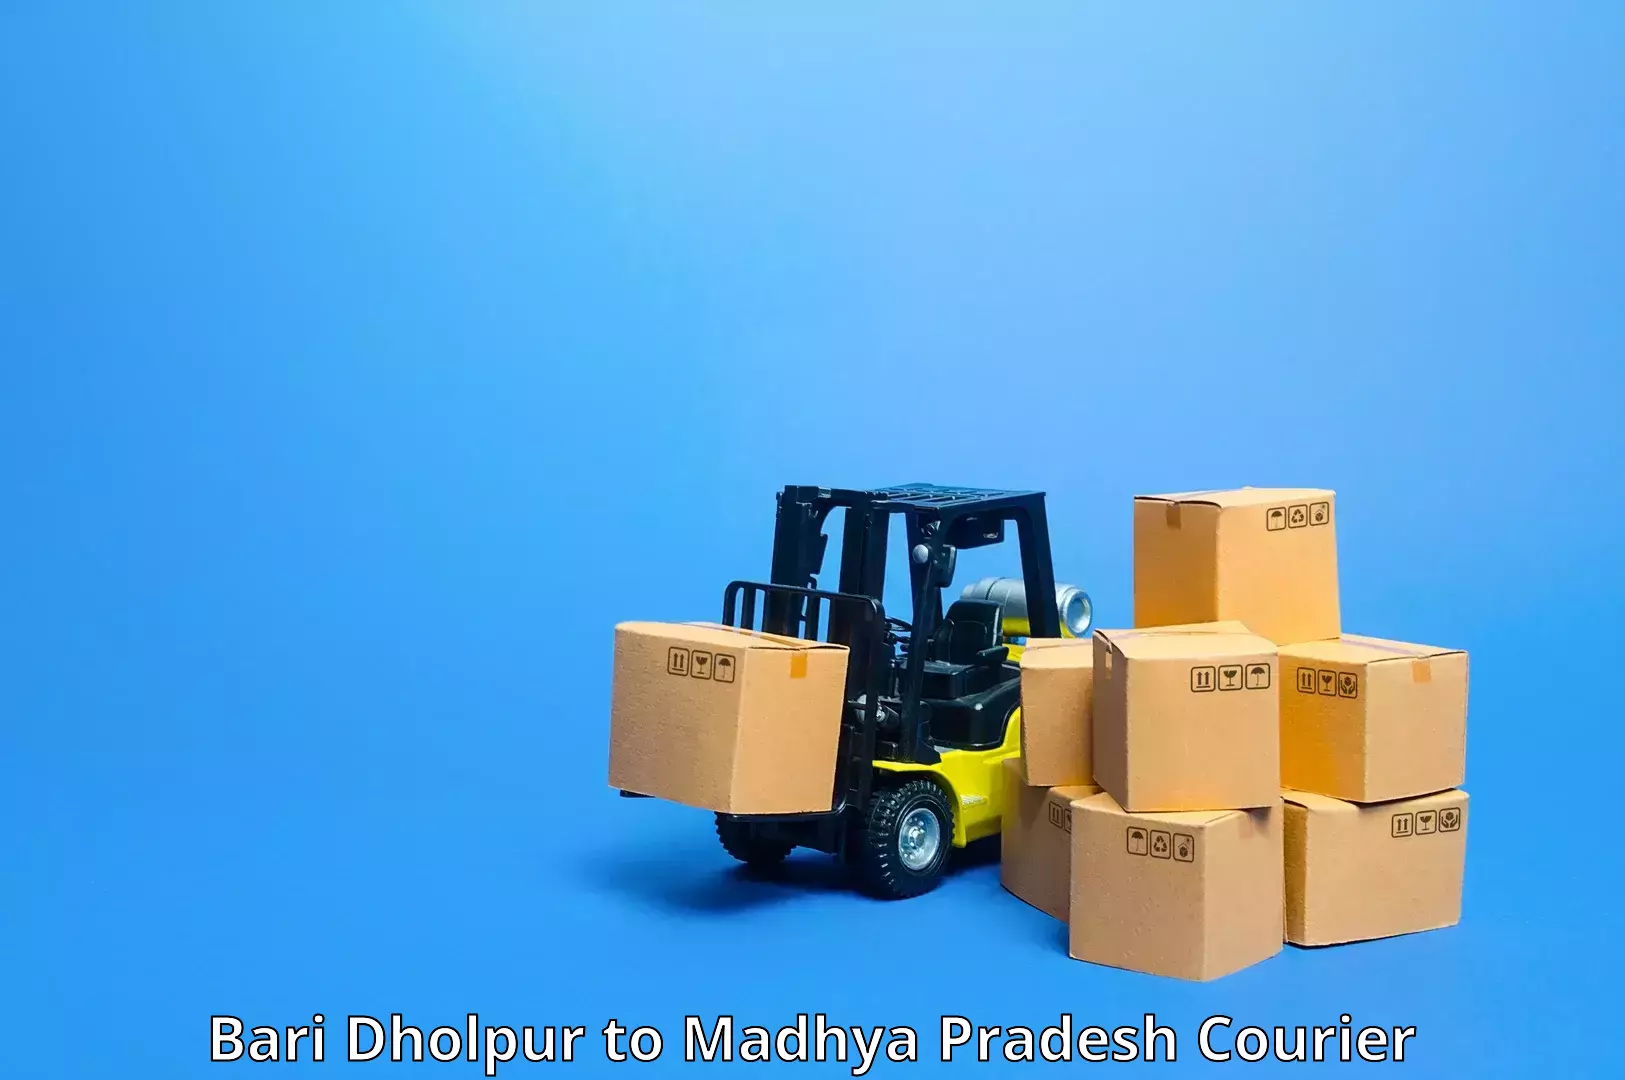 End-to-end delivery Bari Dholpur to Ujjain